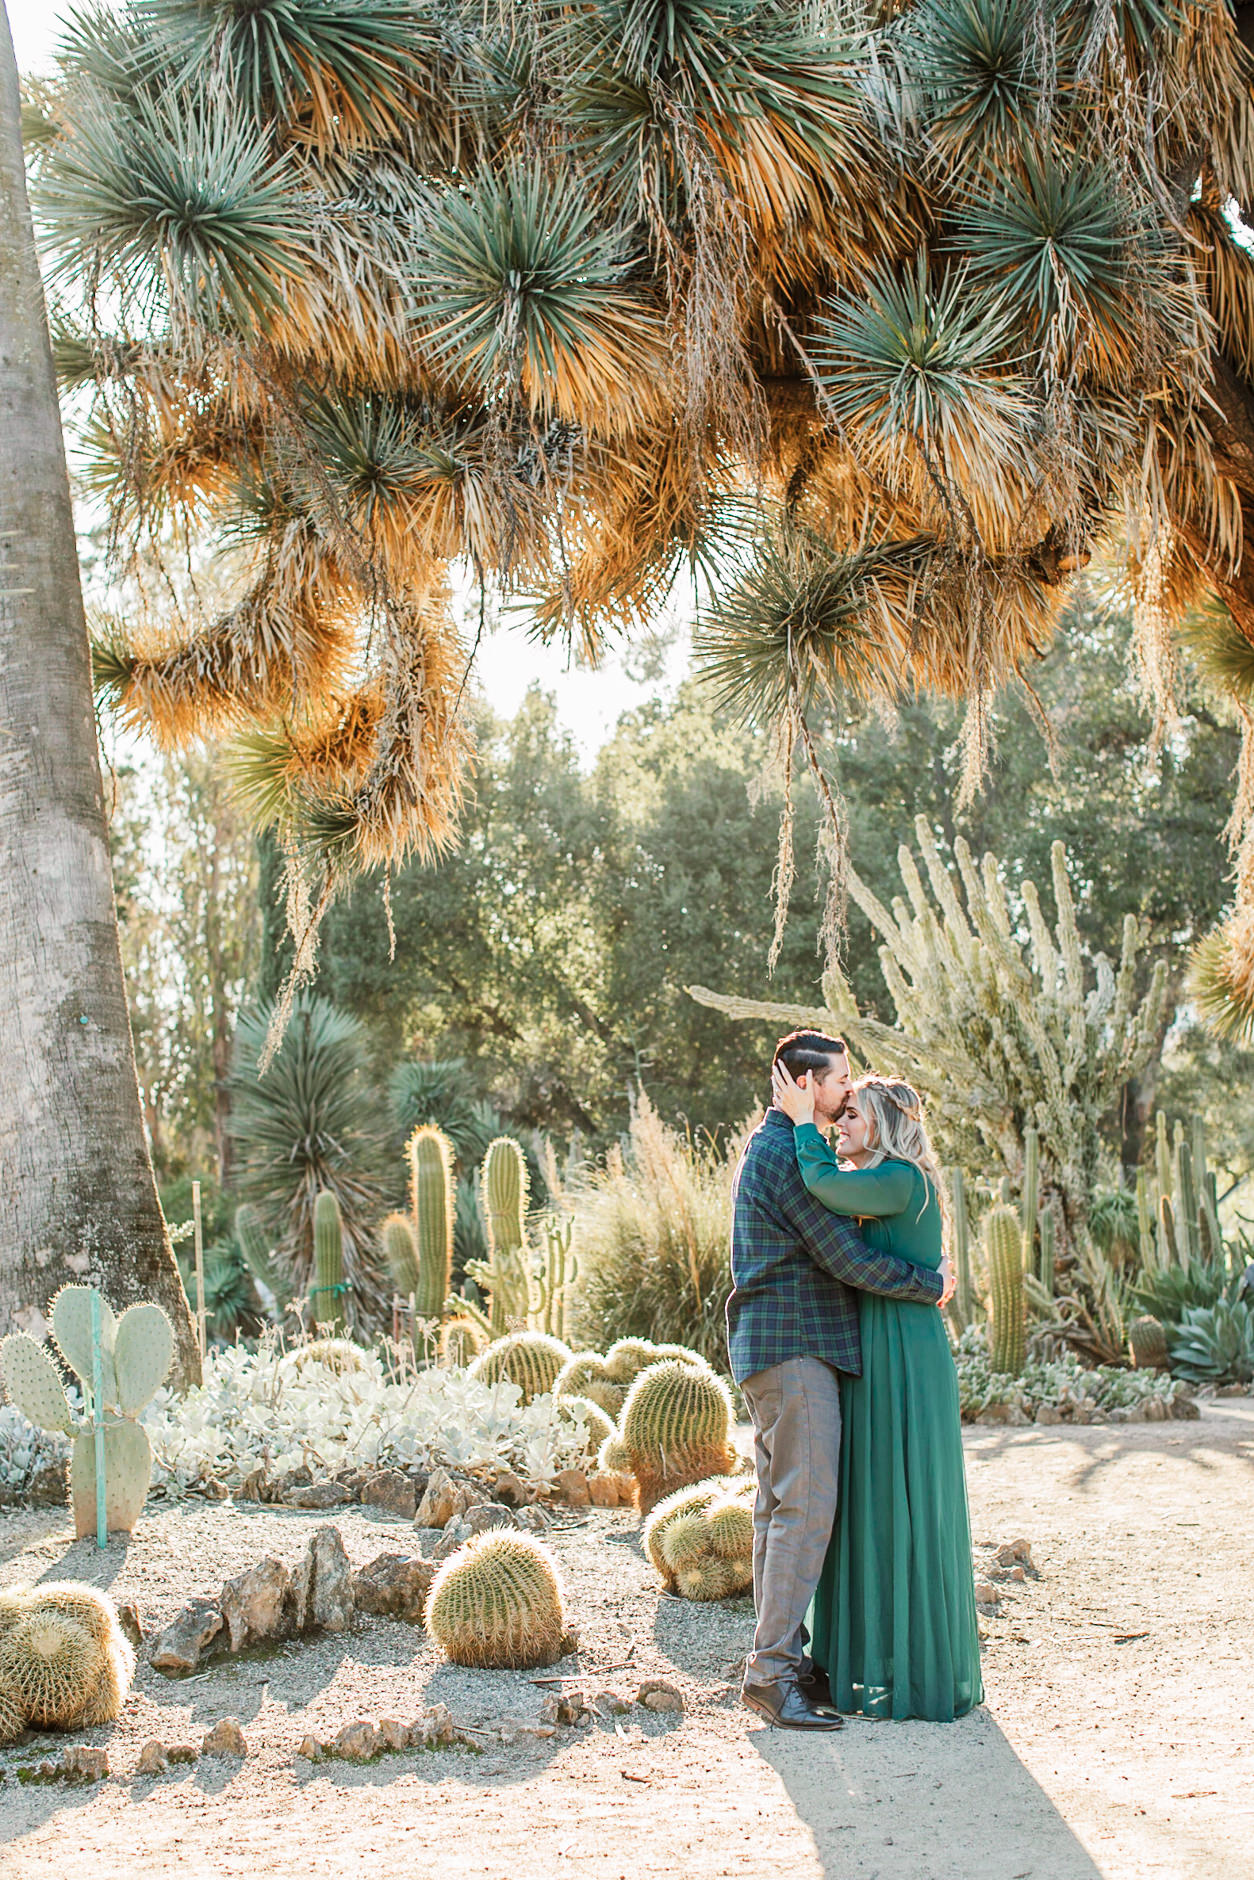 Pullback shot of man kissing fiance on forehead during their engagement session at the Arizona Cactus Garden